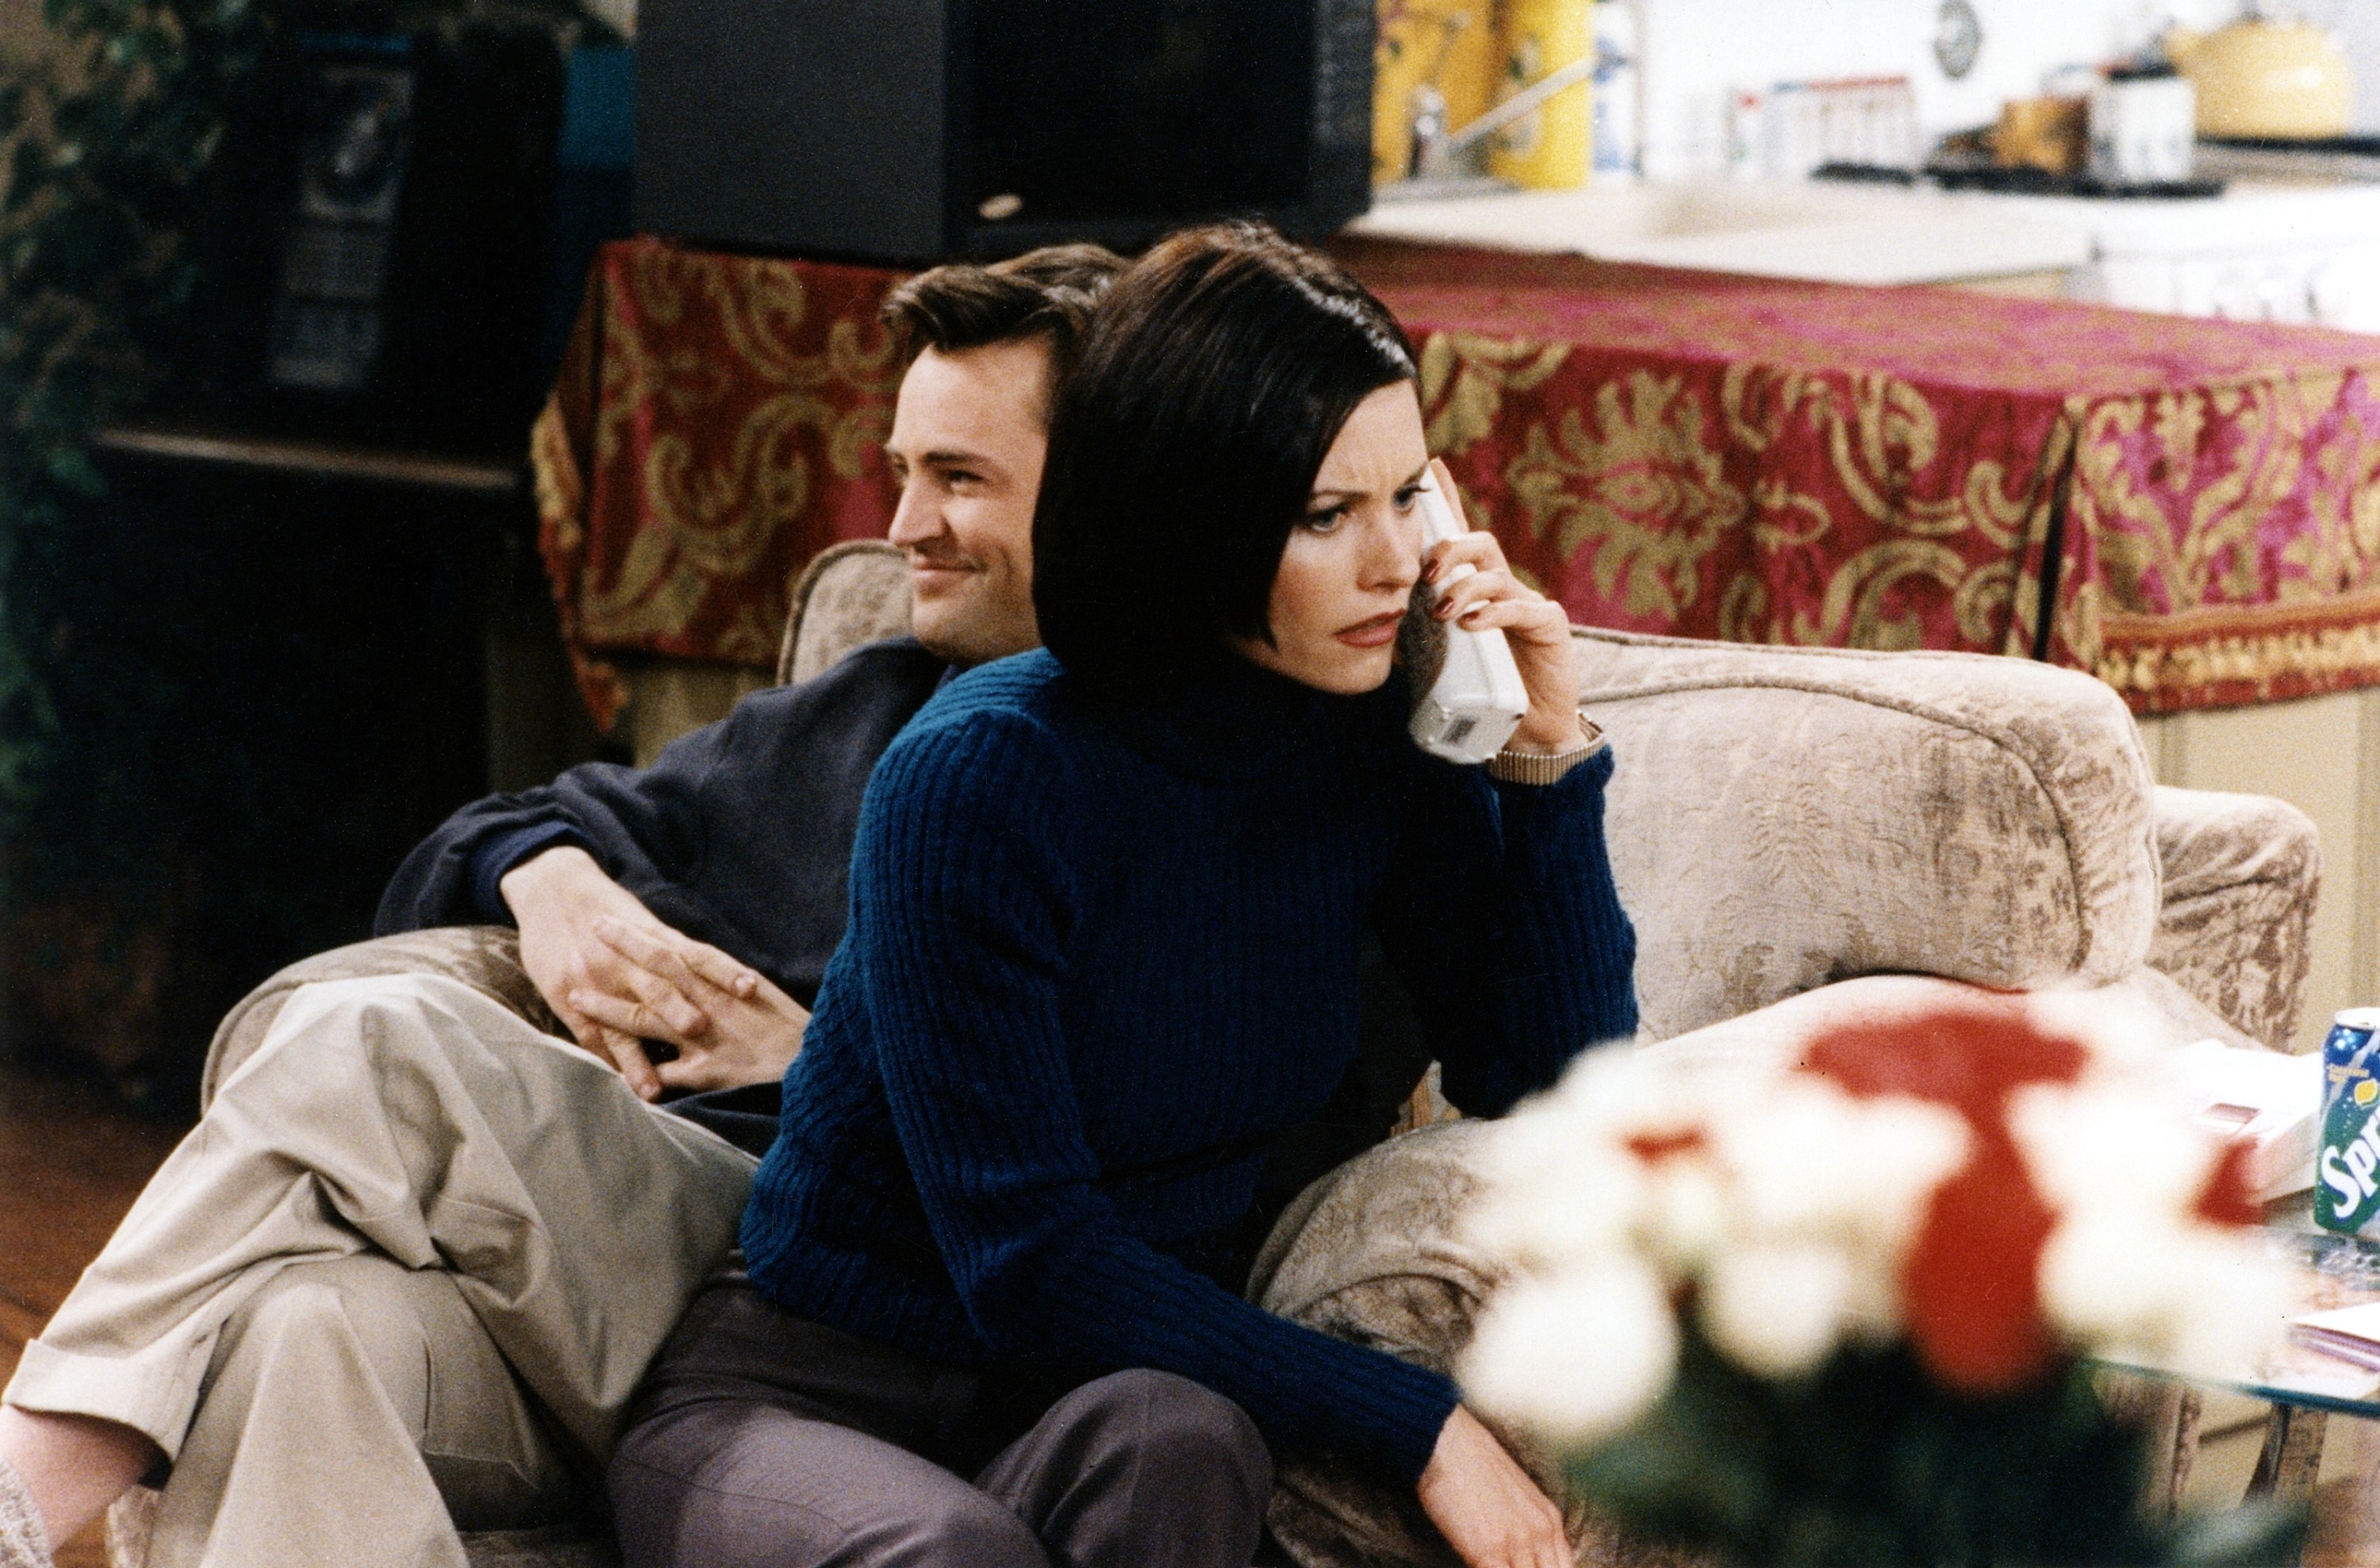 Courteney Cox and Matthew Perry in a living room scene, with Courteney Cox on the phone and Matthew Perry casually leaning back on the couch